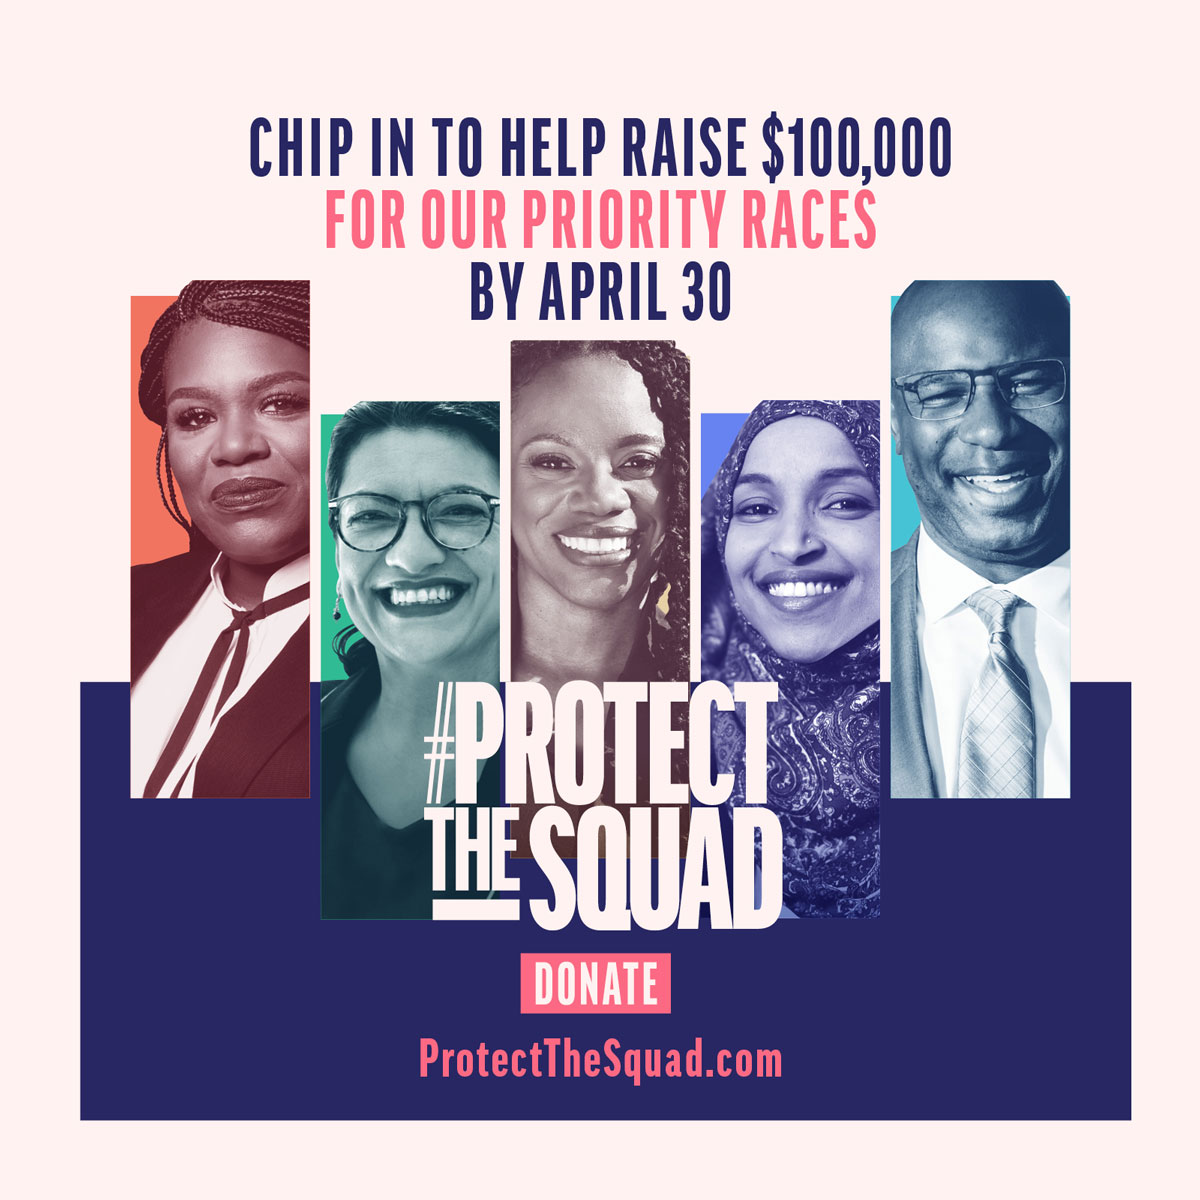 We're kicking off our campaign to #ProtectTheSquad with progressive allies and leaders right now!

Our Squad is strong, but our movement is under attack from GOP-funded corporate Super PACs.

We're coming together to raise $100K for them all, chip in now! ProtectTheSquad.com